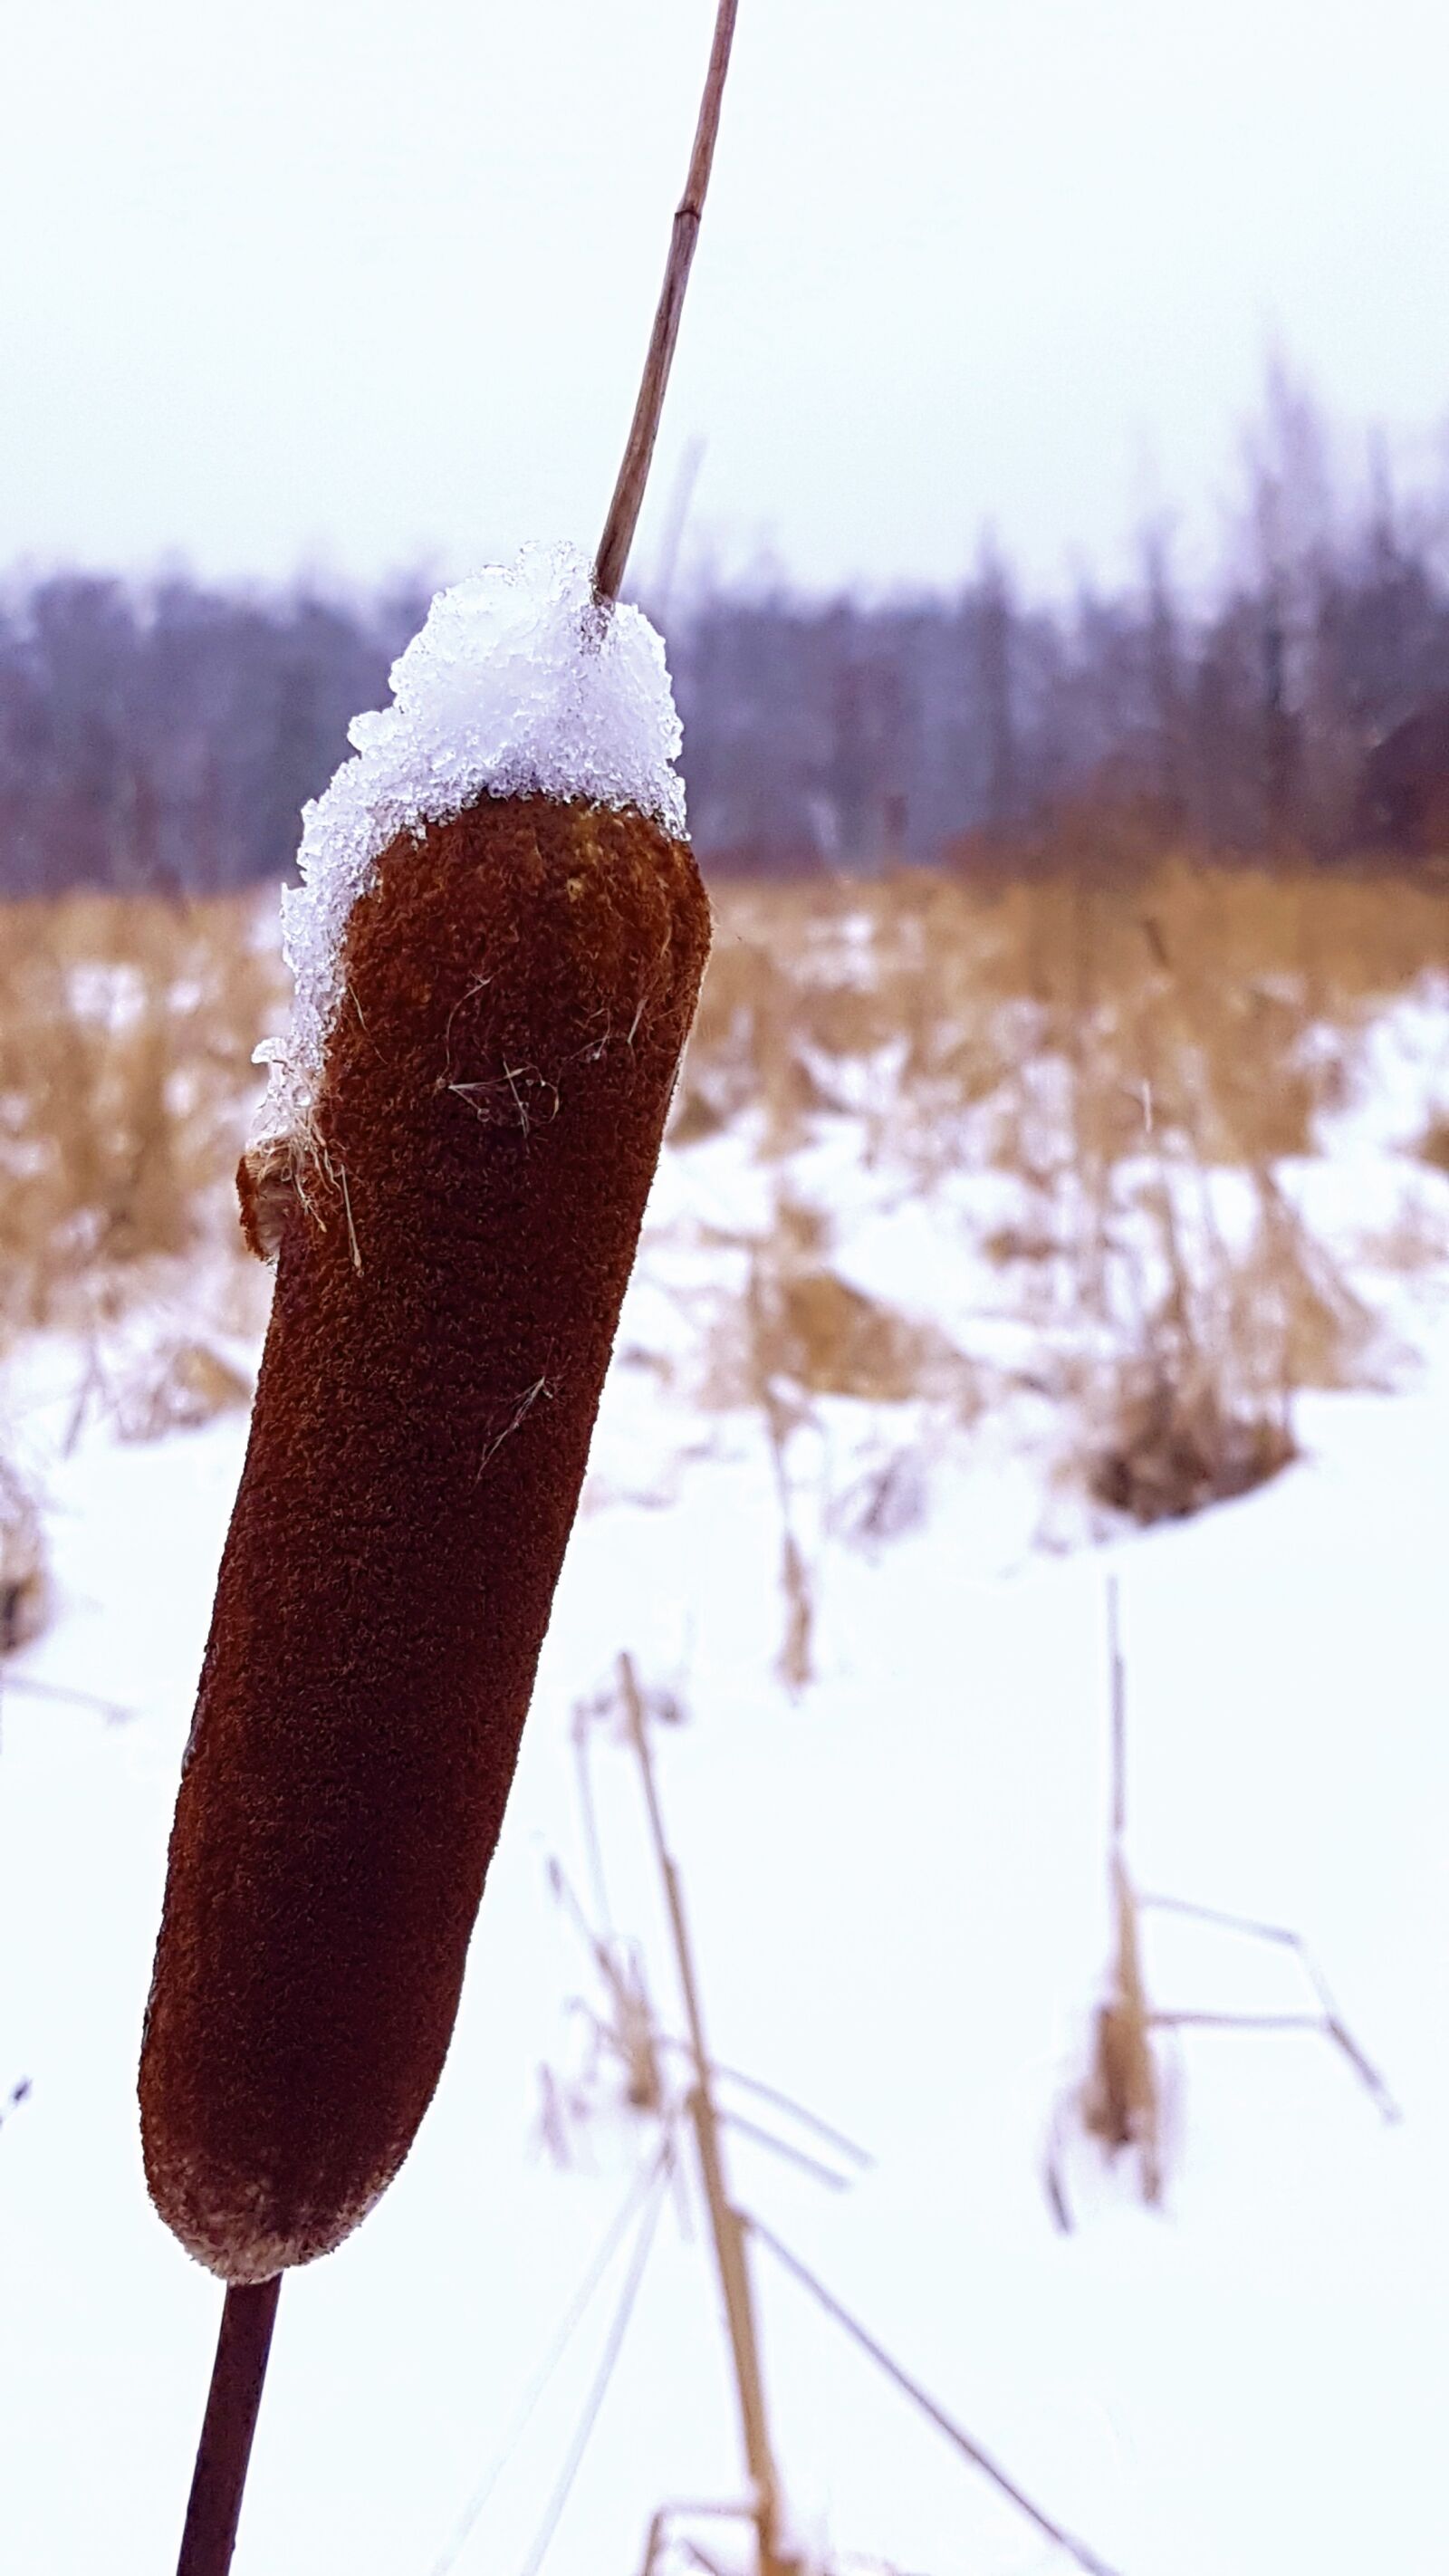 Samsung Galaxy S7 sample photo. Cattail, winter, nature photography